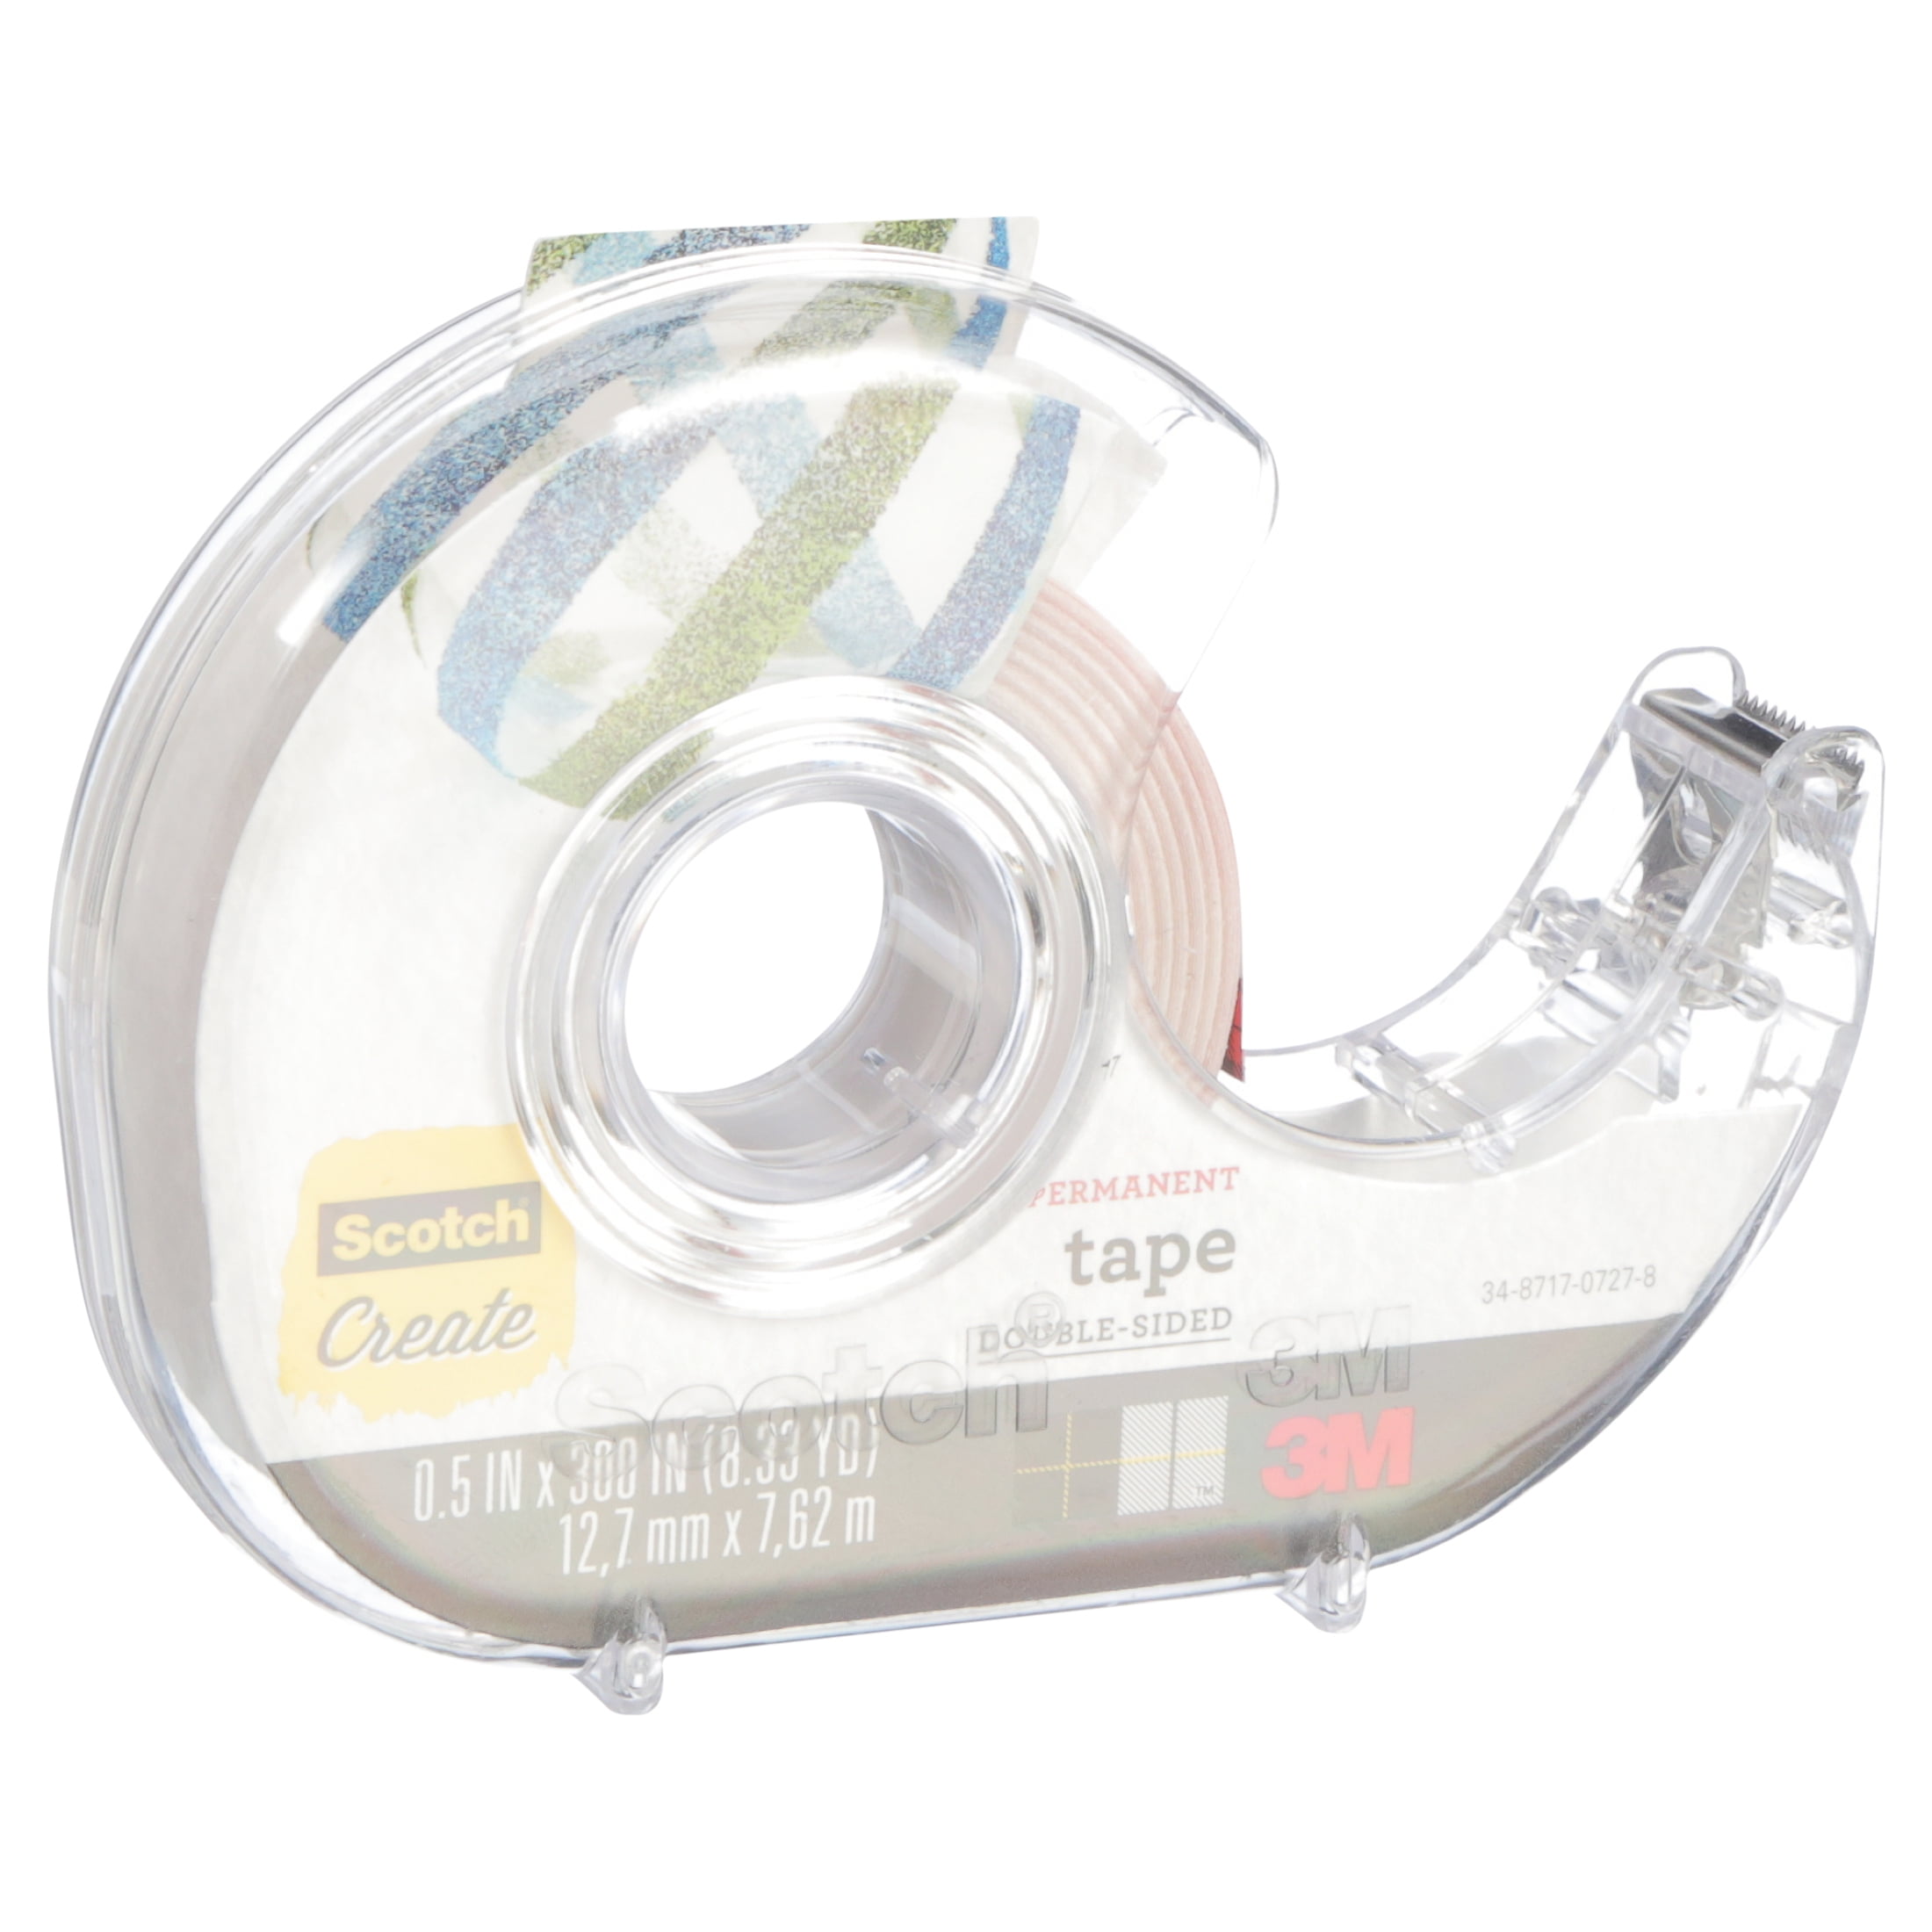 Tape Double Sided 1/2 in x 300 in - New 002-CFT 